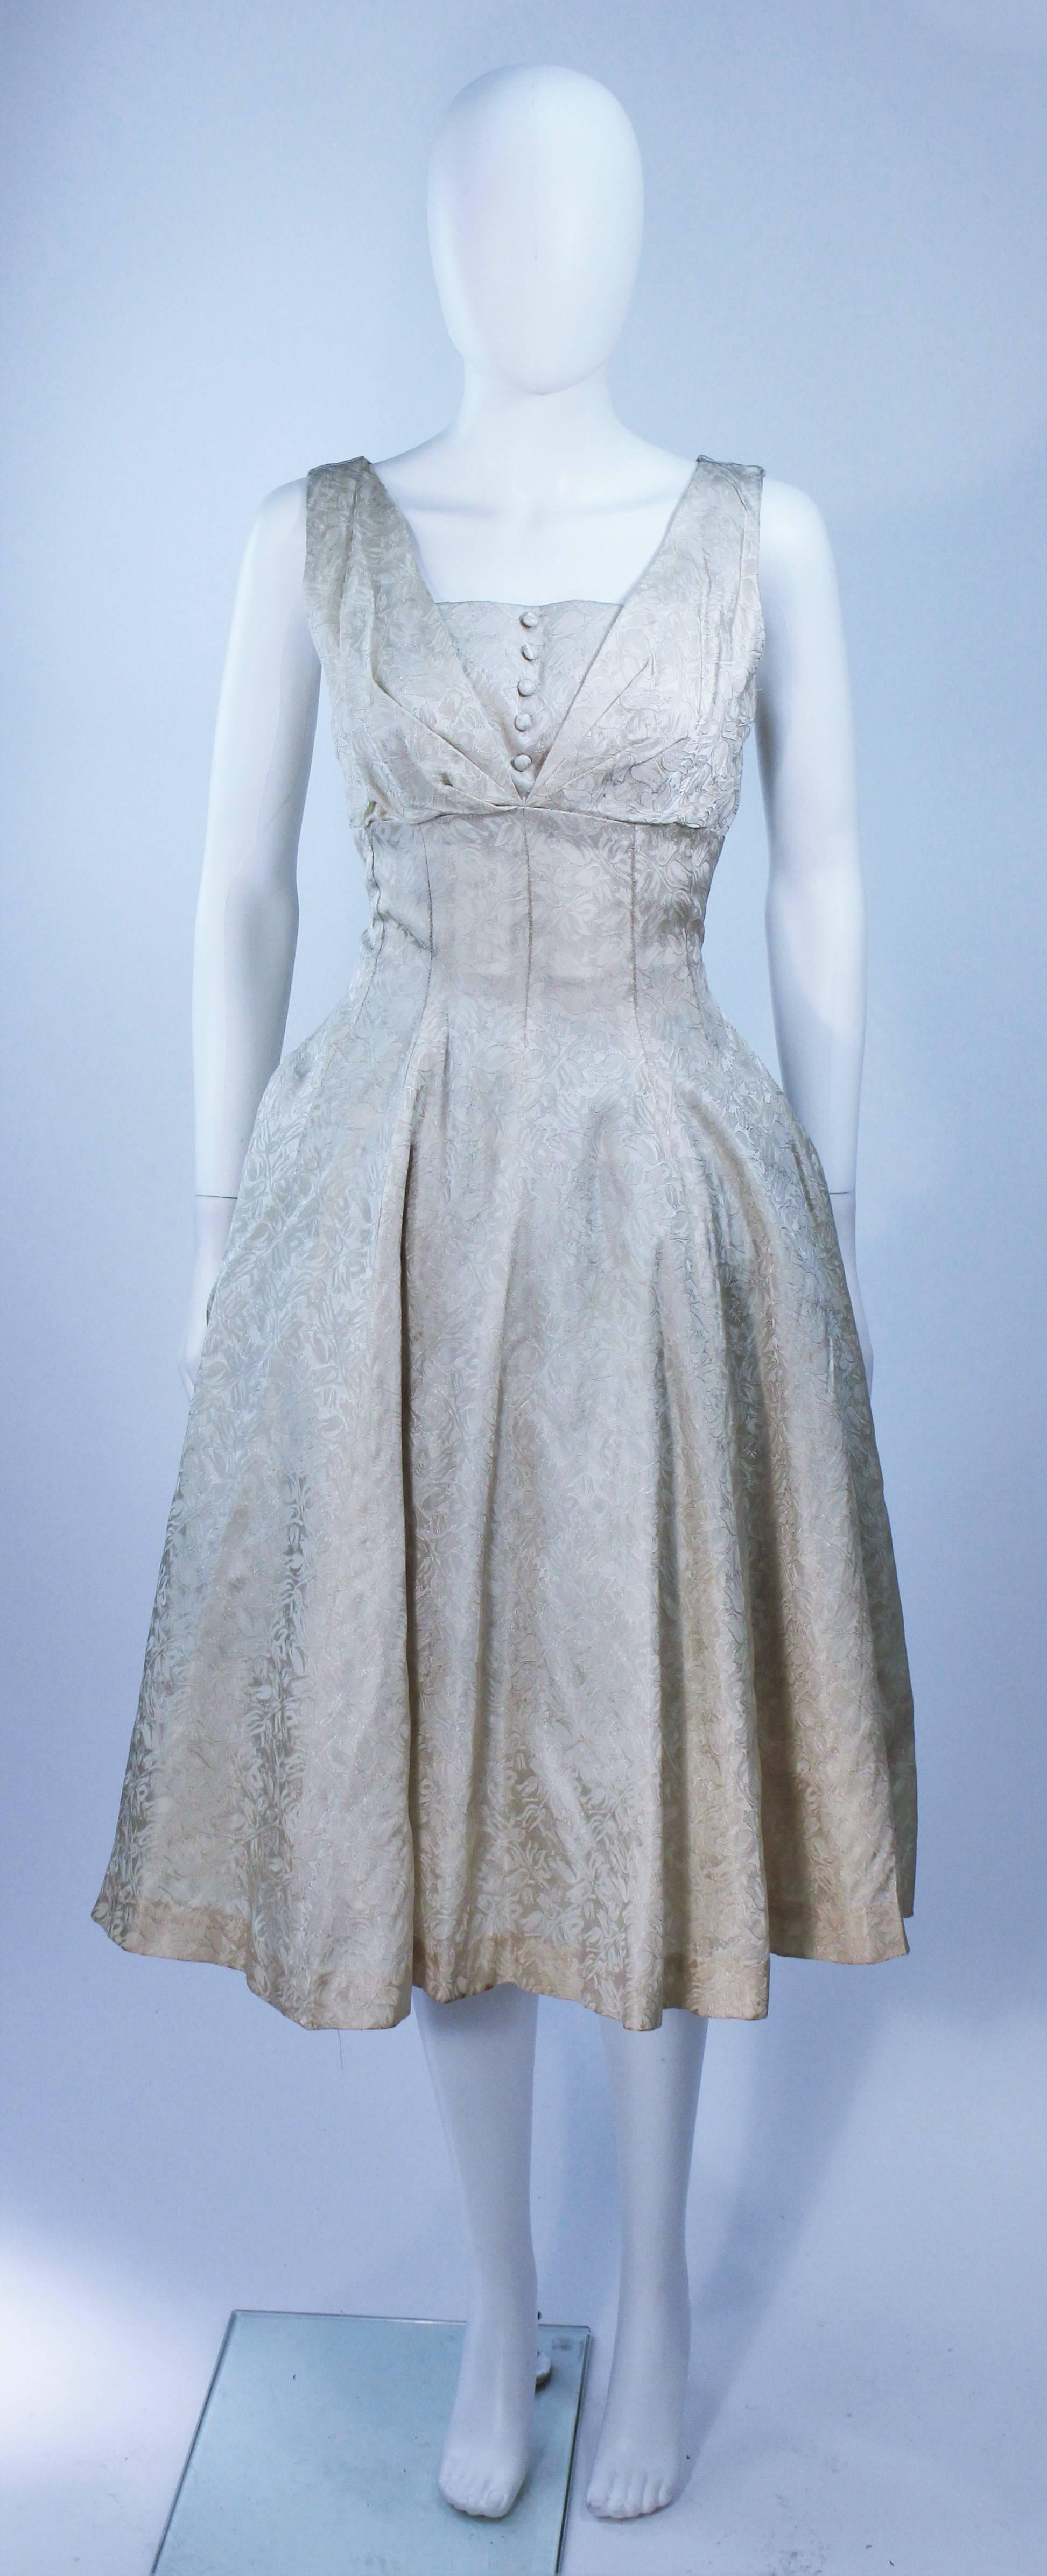  This dress is composed of an off white cream brocade. Features center front button accents and a zipper closure. In great vintage condition. 

  **Please cross-reference measurements for personal accuracy. 

Measures (Approximately)
Length: